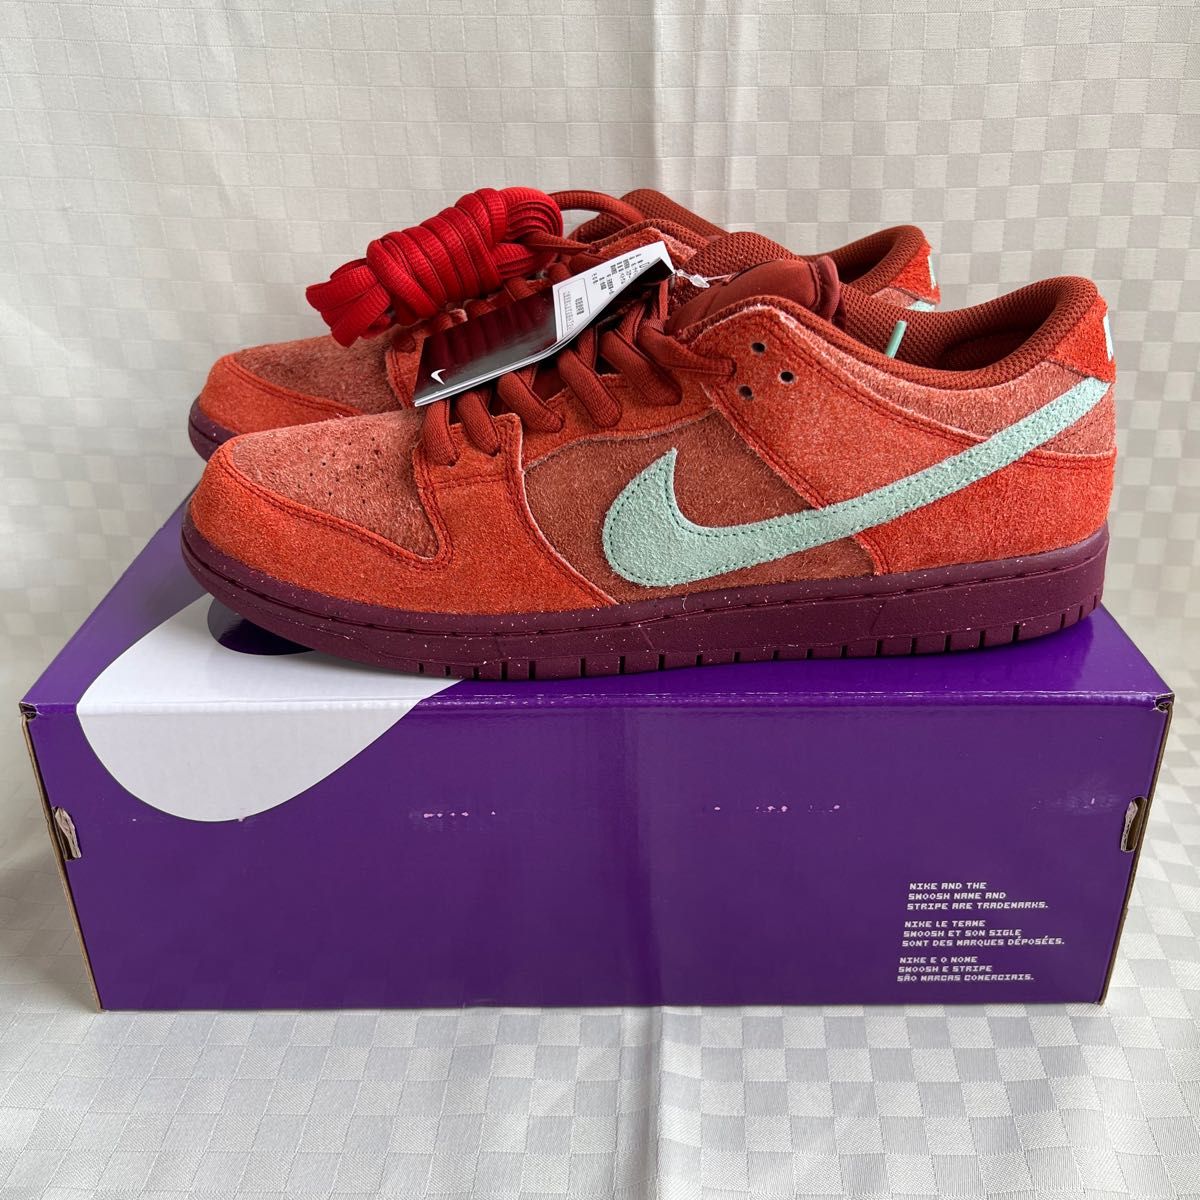 NIKE SB DUNK LOW PRO PRM MYSTIC RED AND ROSEWOOD US10 5 28 5cm